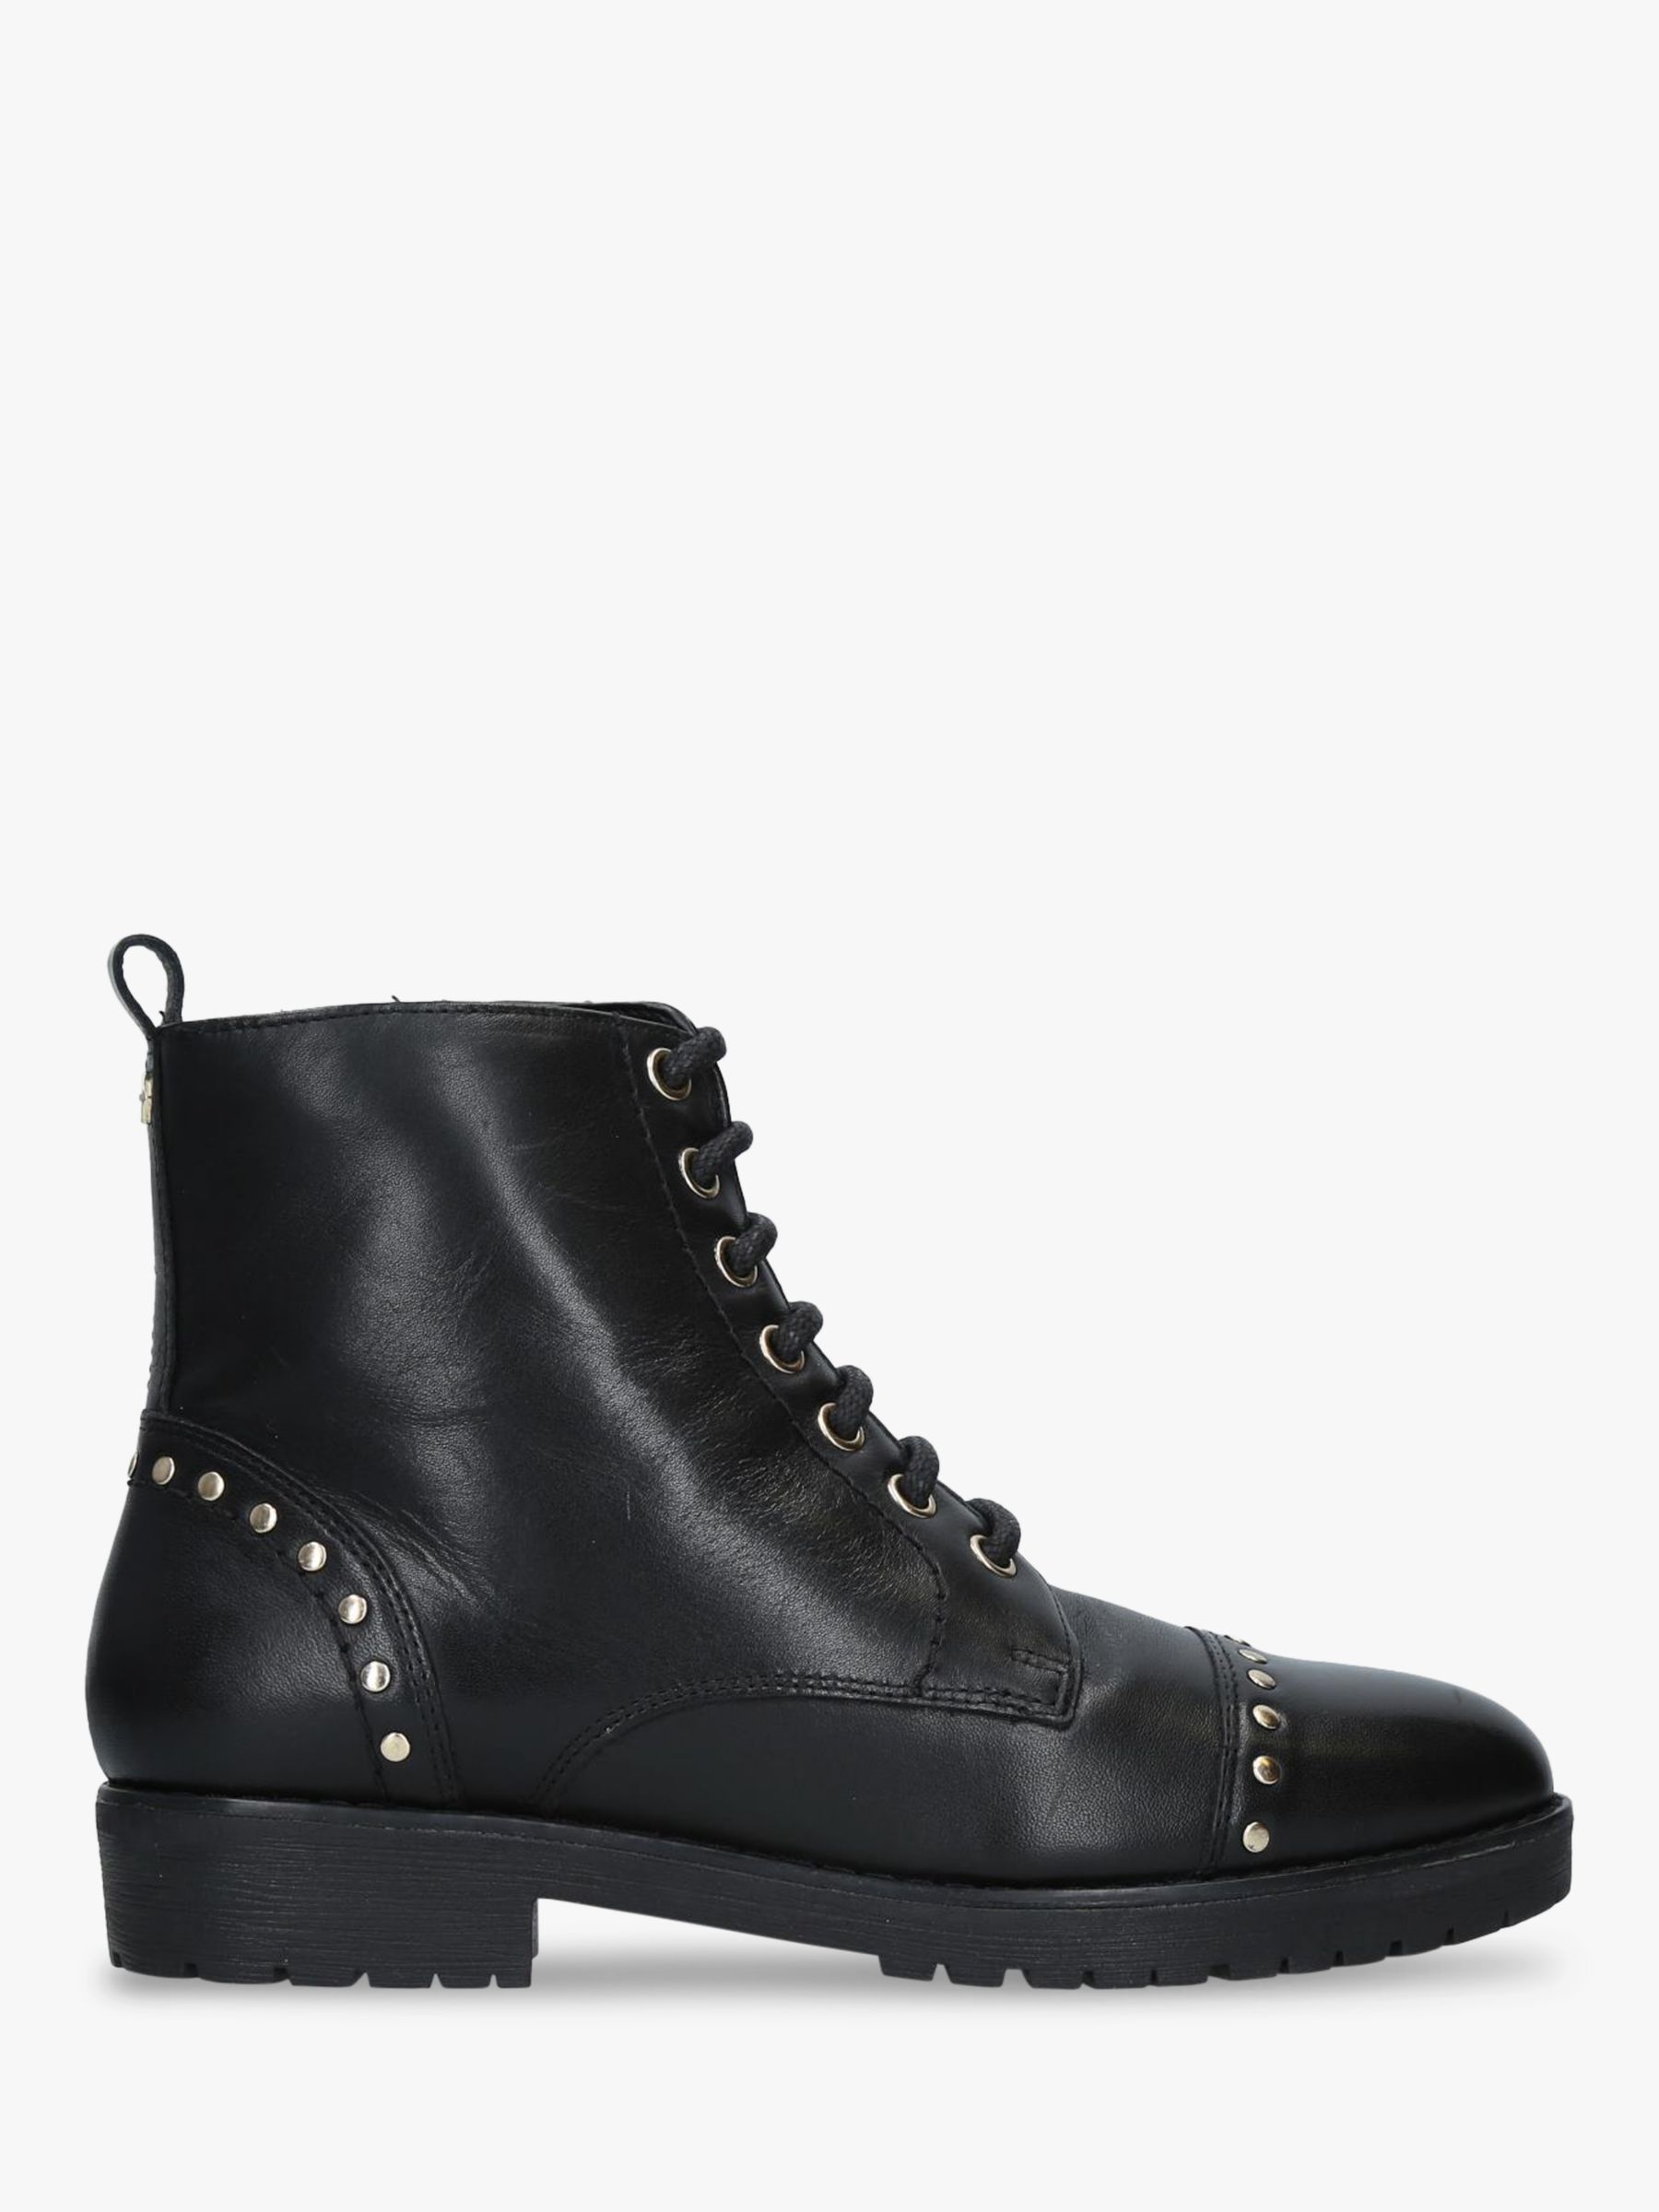 Carvela Steady Stud Lace Up Ankle Boots, Black Leather